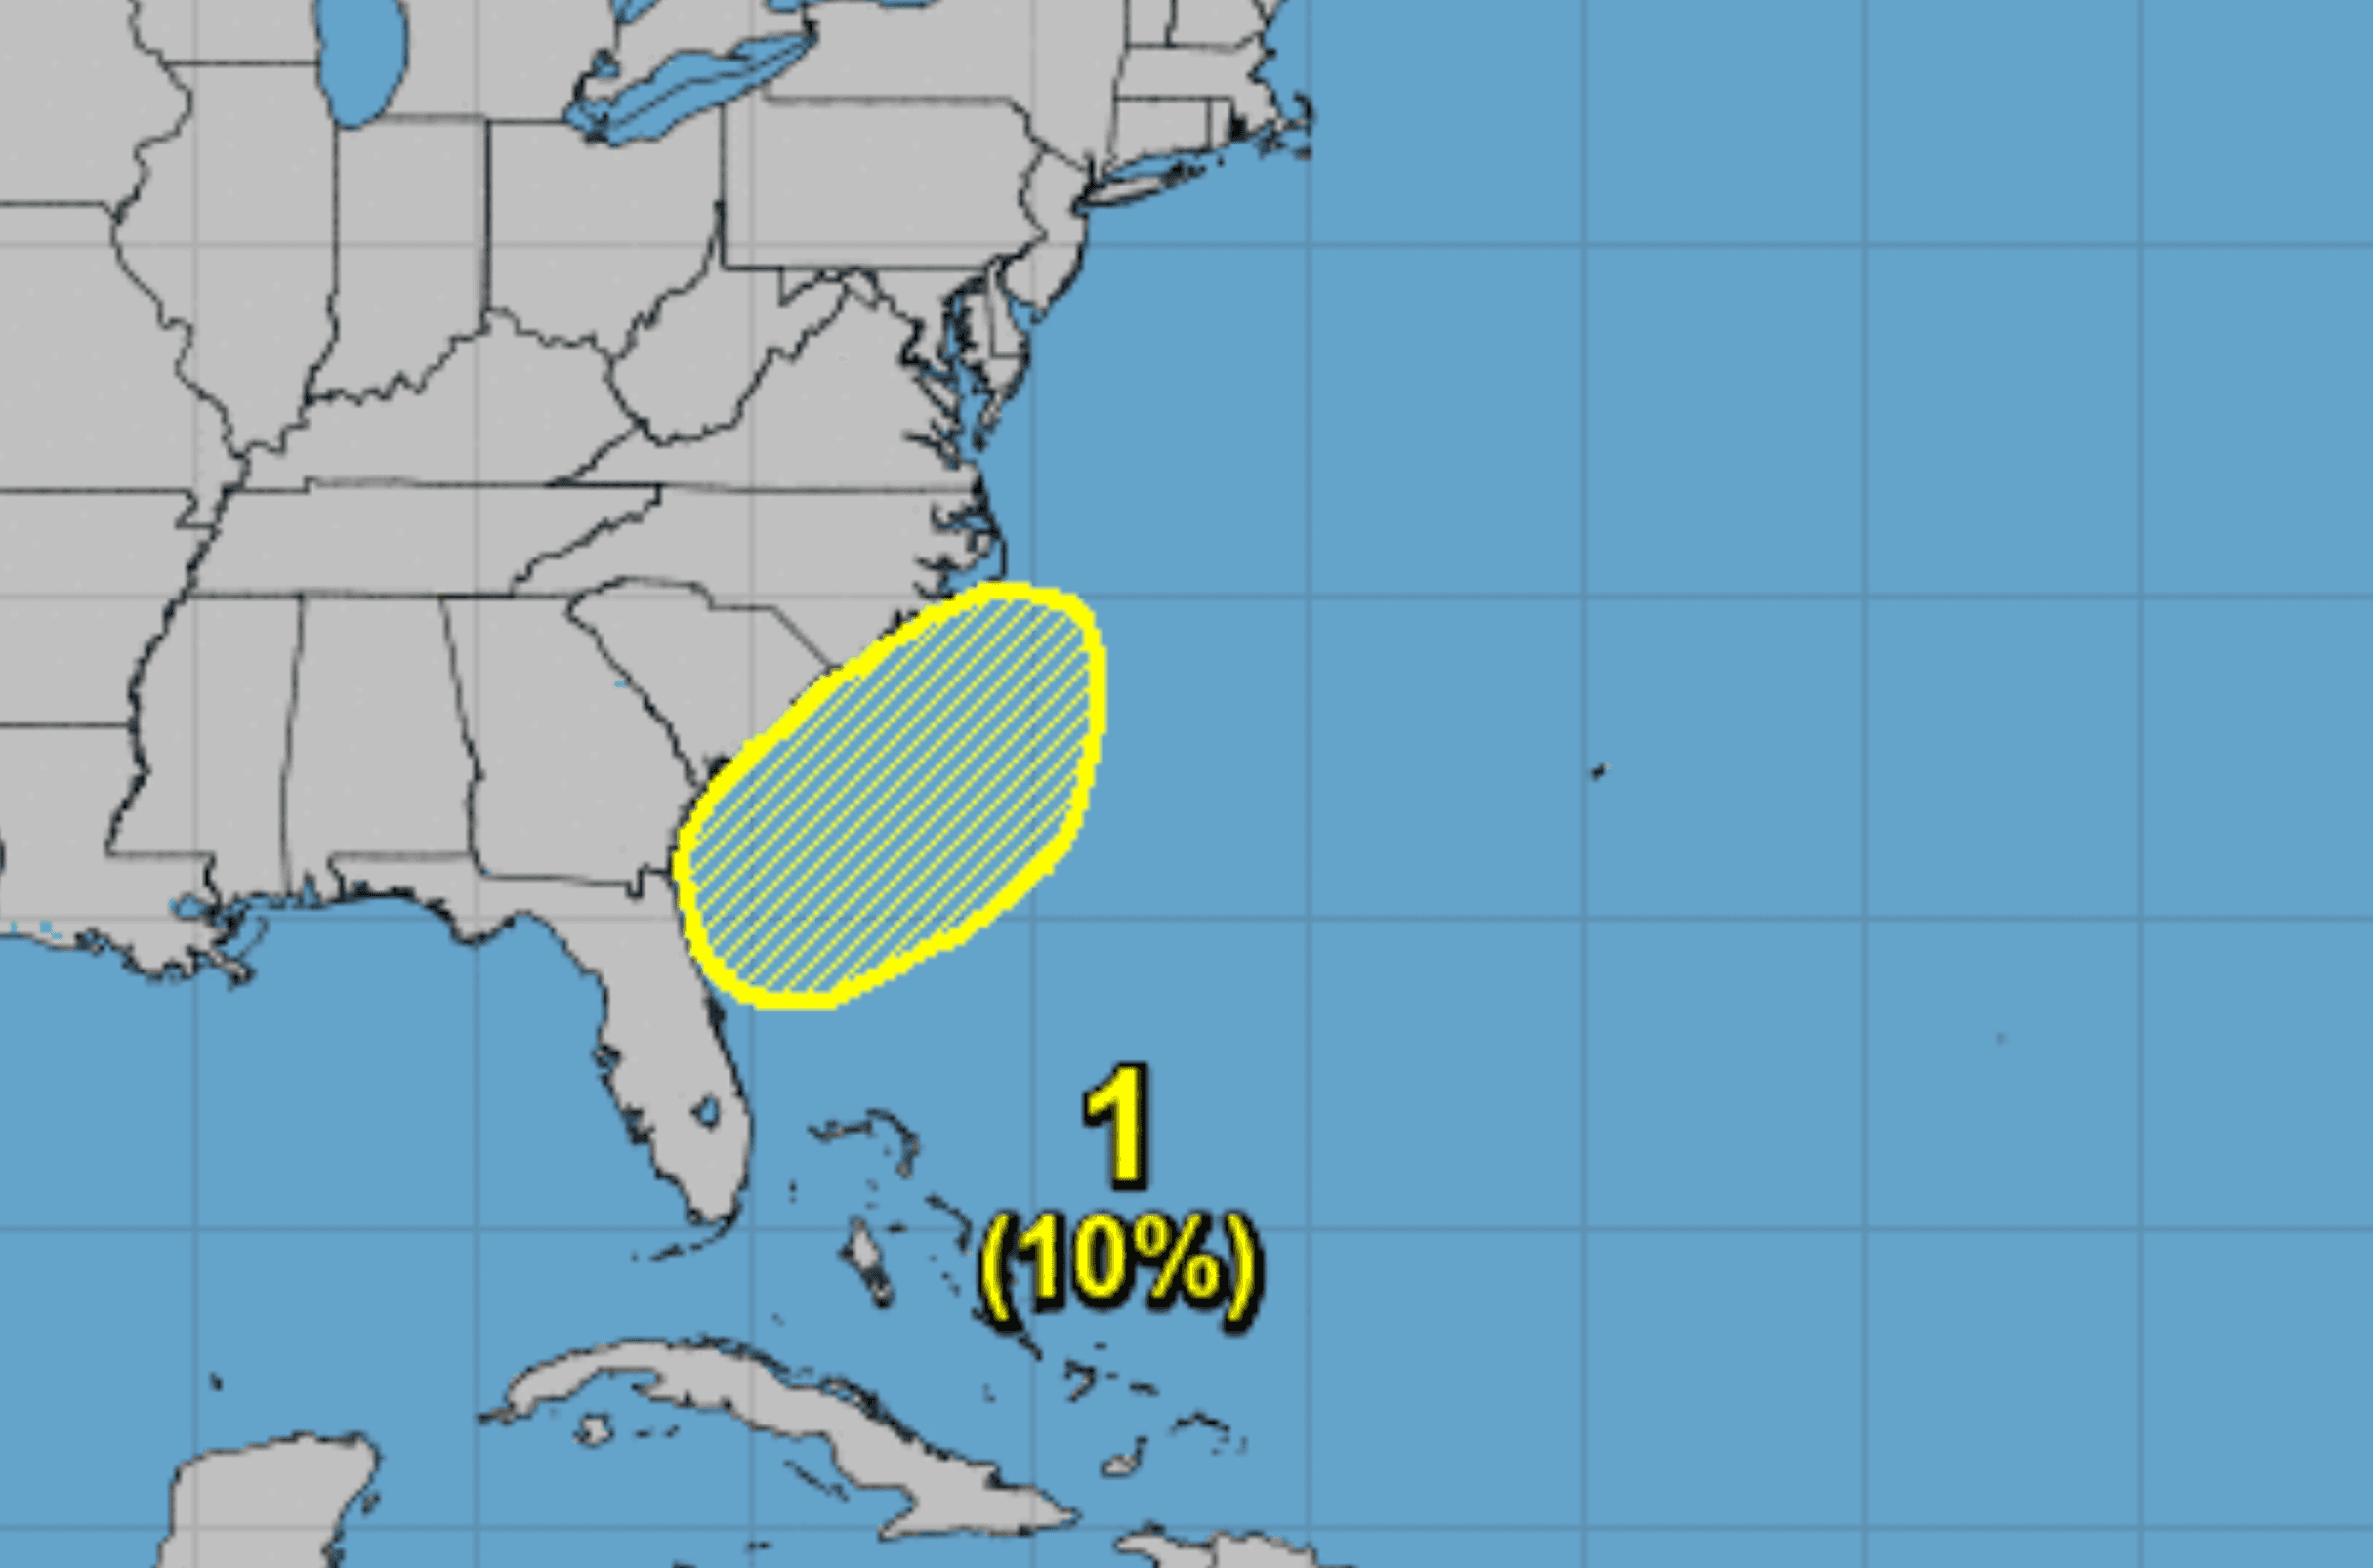 NHC 7-day tropical outlook